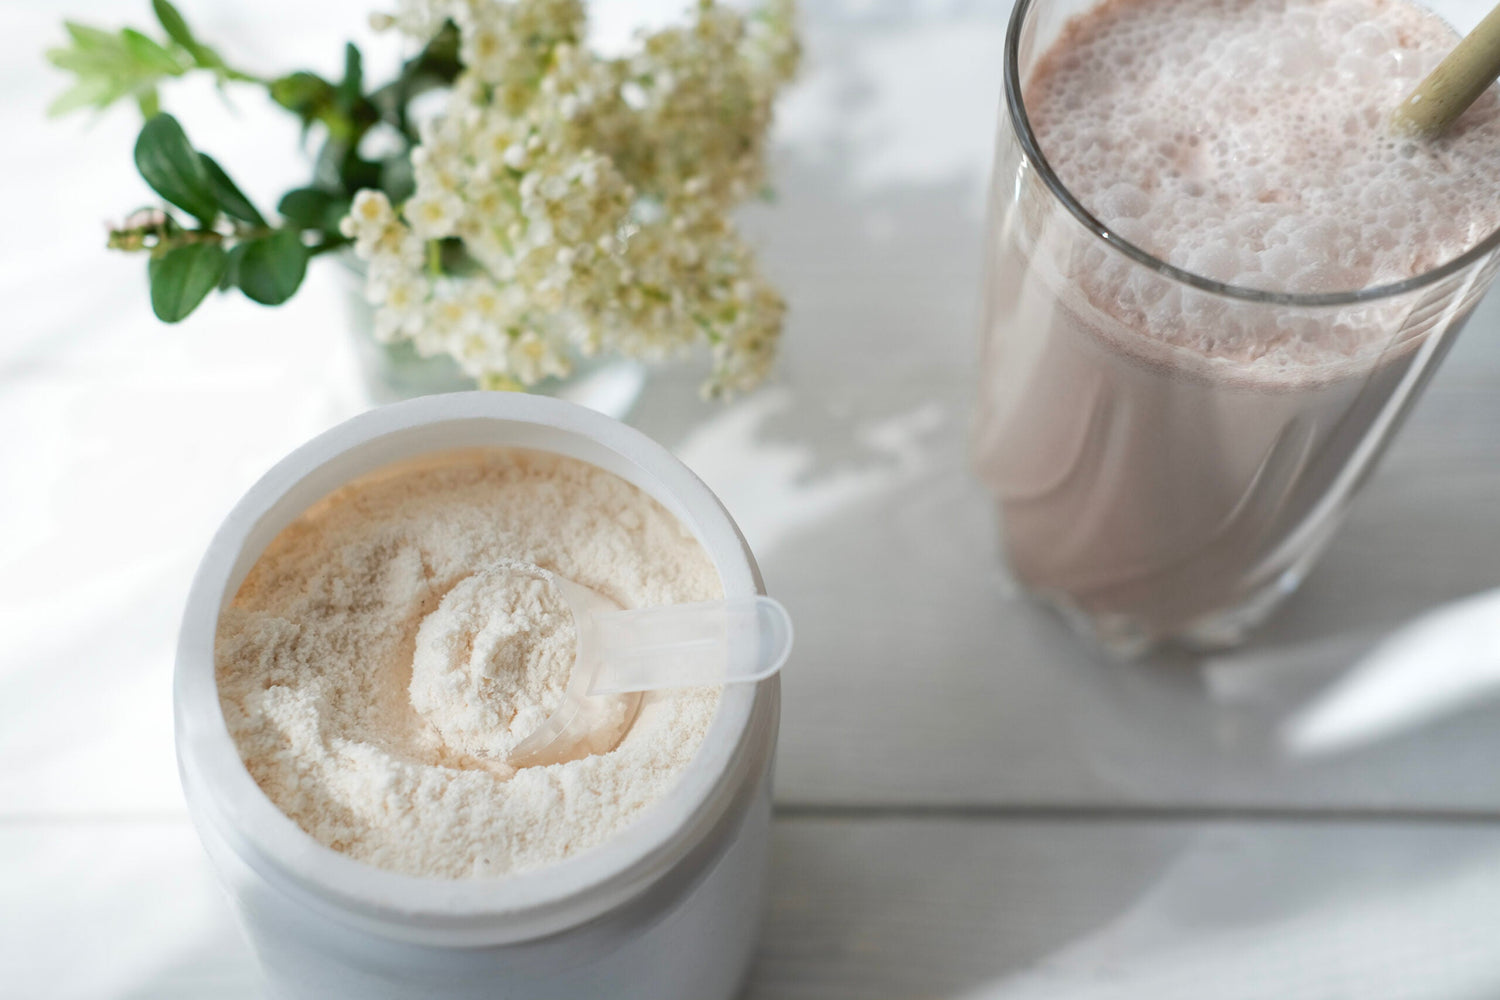 WHEY PROTEIN VS PLANT PROTEIN? WHAT THE STUDIES SHOW...